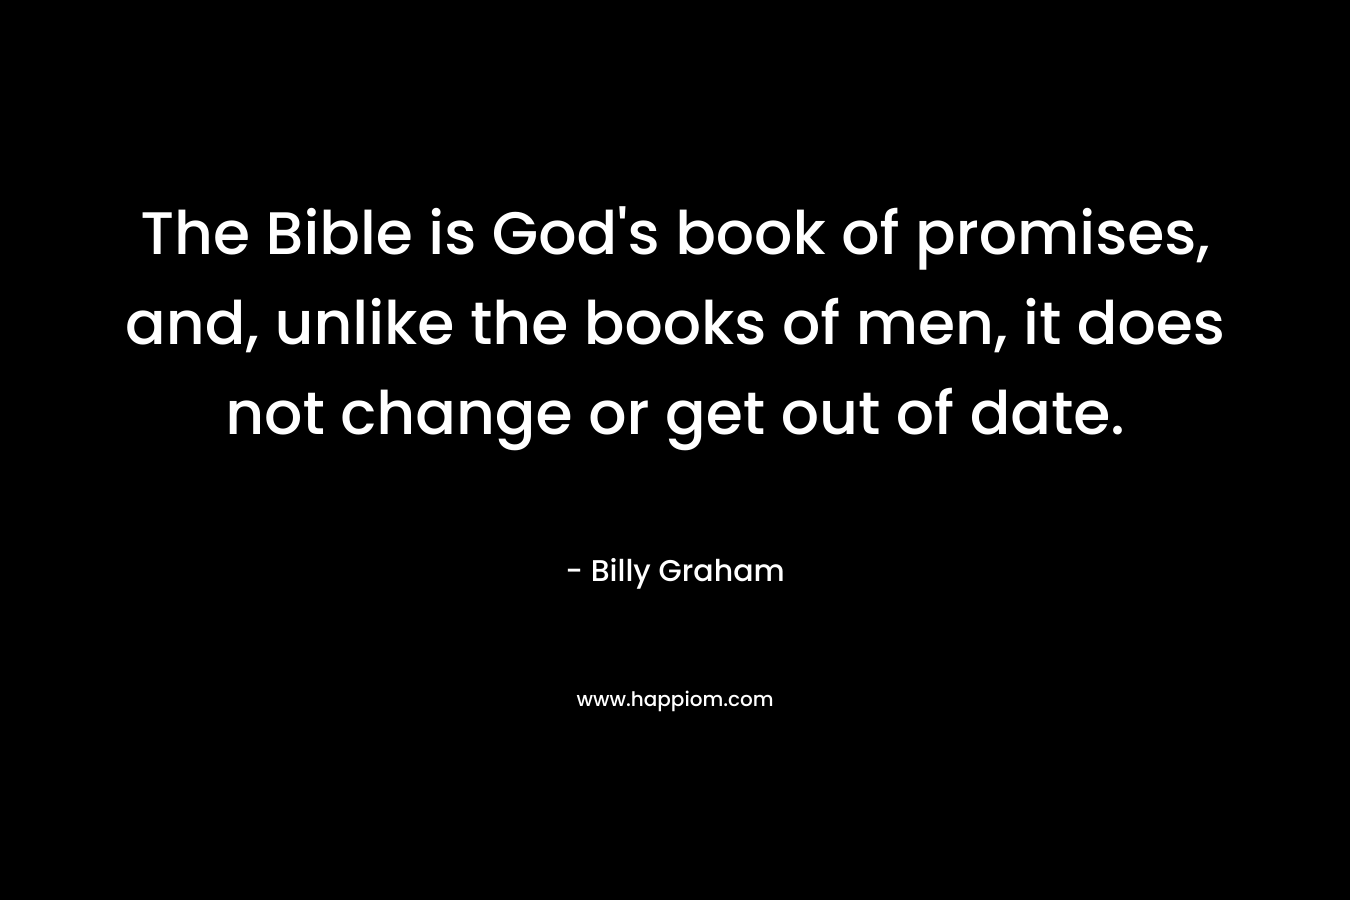 The Bible is God's book of promises, and, unlike the books of men, it does not change or get out of date.